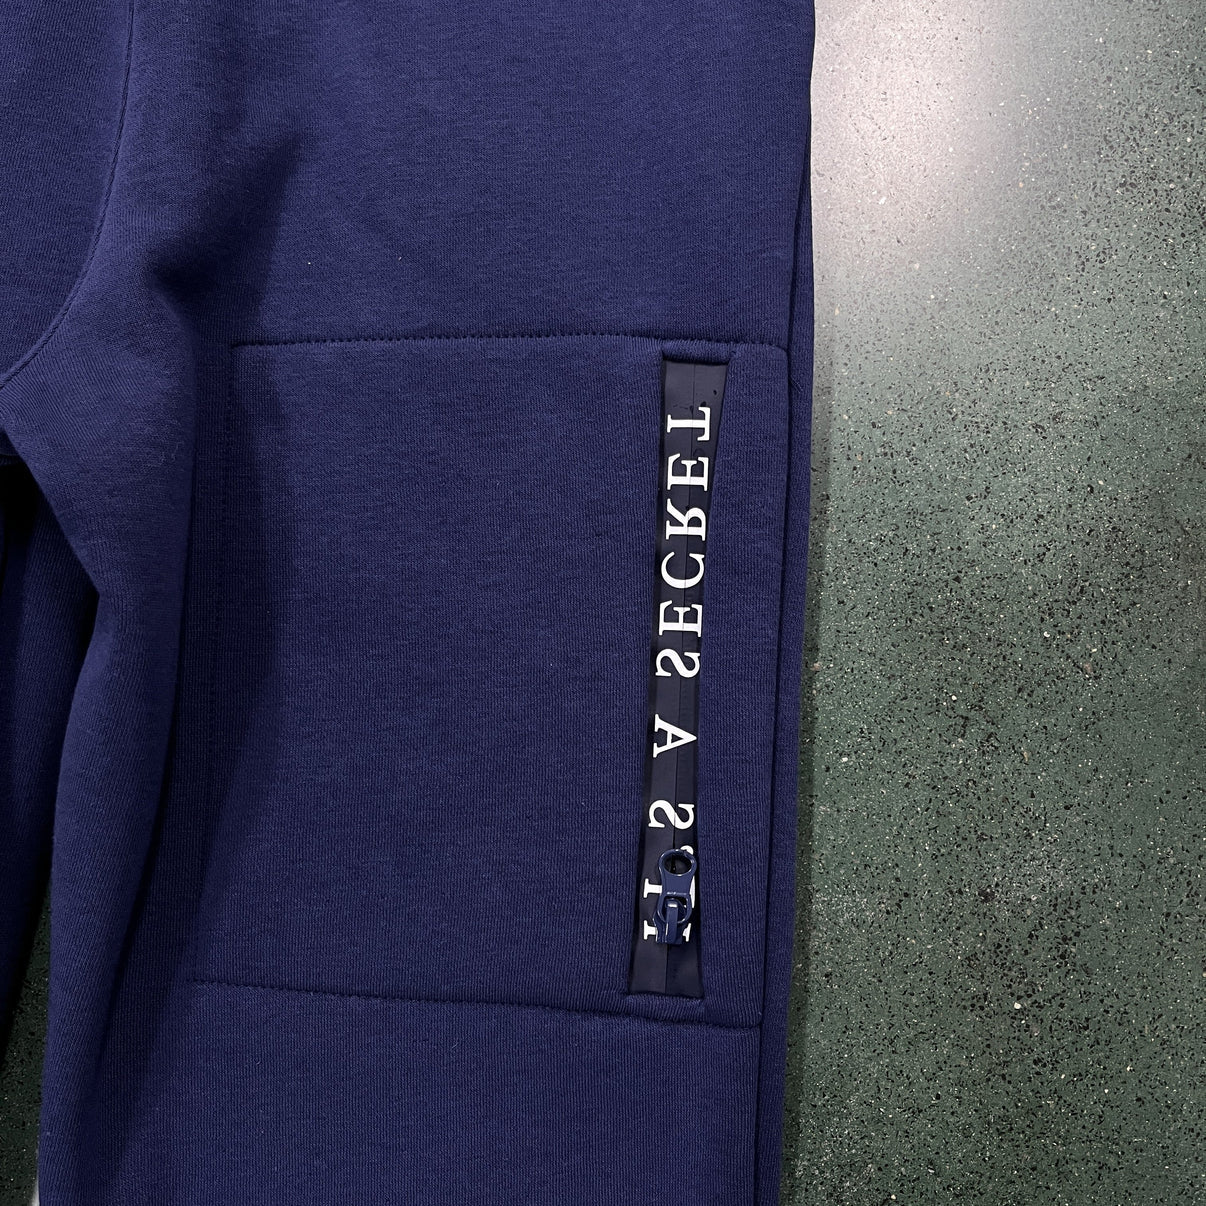 TS CHENILLE DECDODED2.0 HOODIE TRACKSUIT -MEDIEVAL BLUE